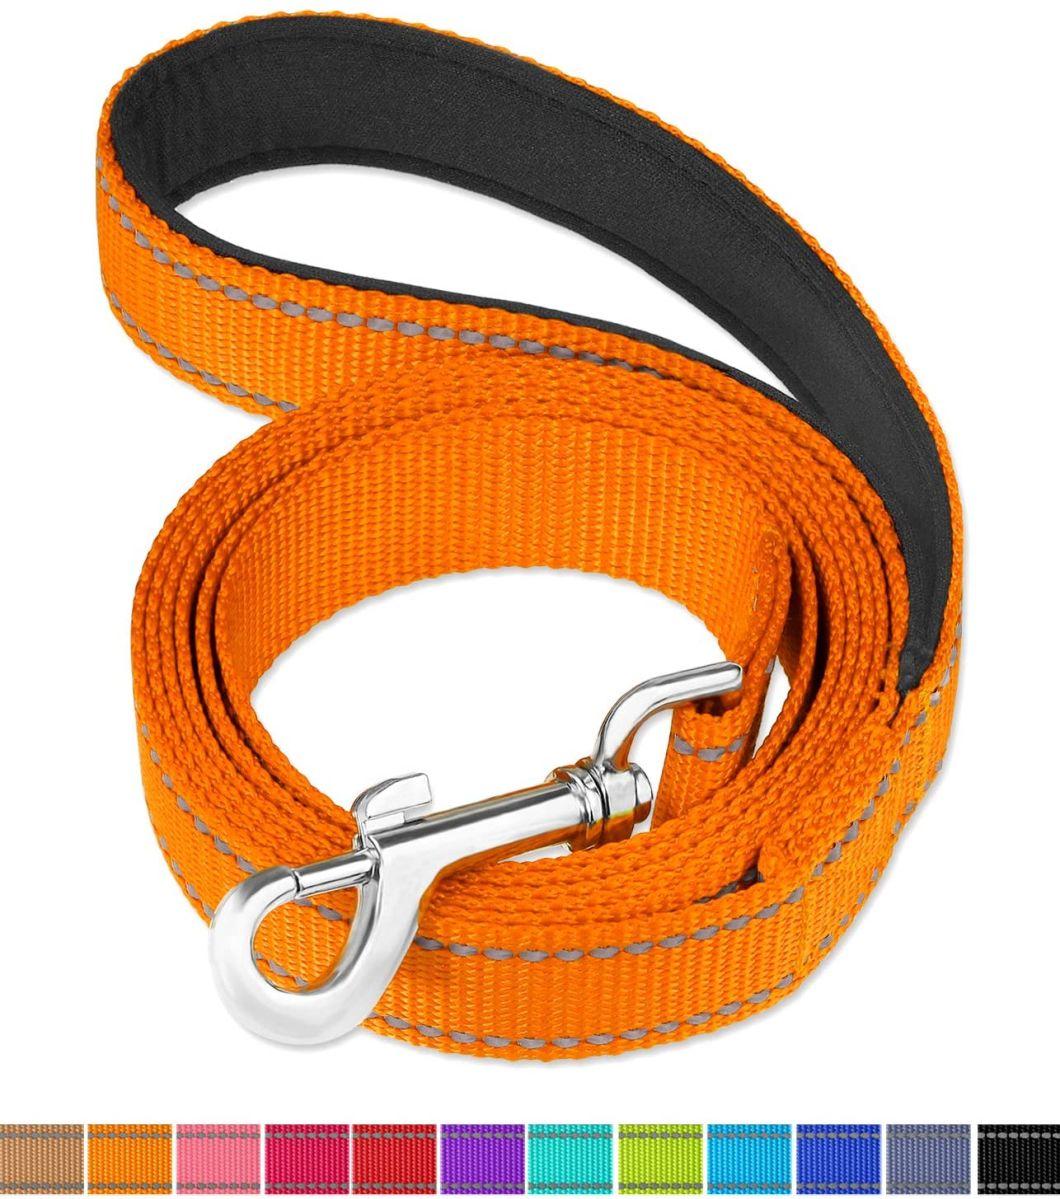 Walking Lead for Large, Medium & Small Dogs Reflective Dog Lead